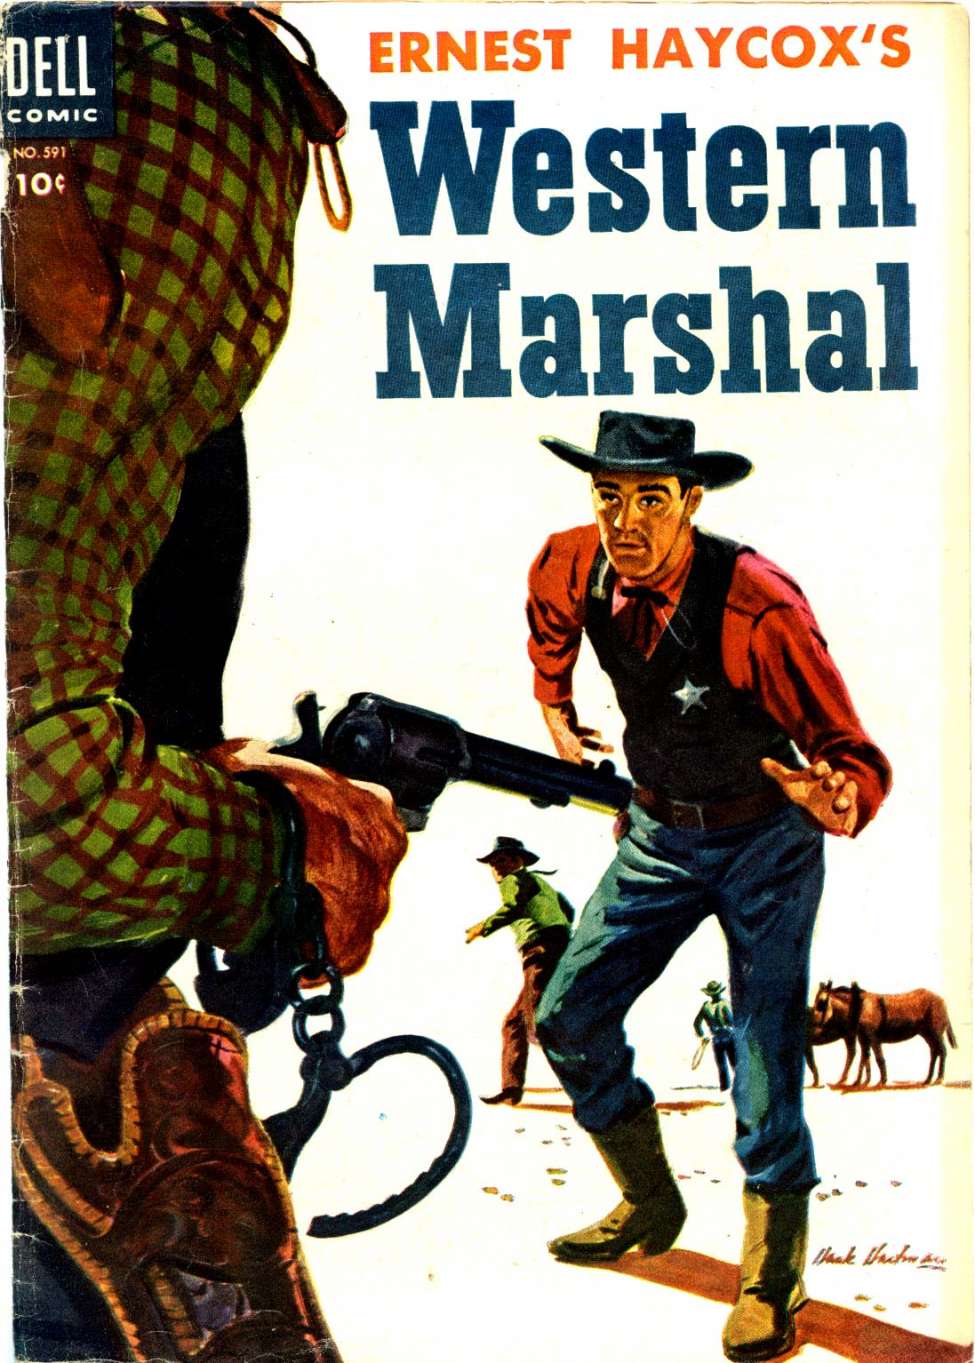 Book Cover For 0591 - Ernest Haycox's Western Marshall